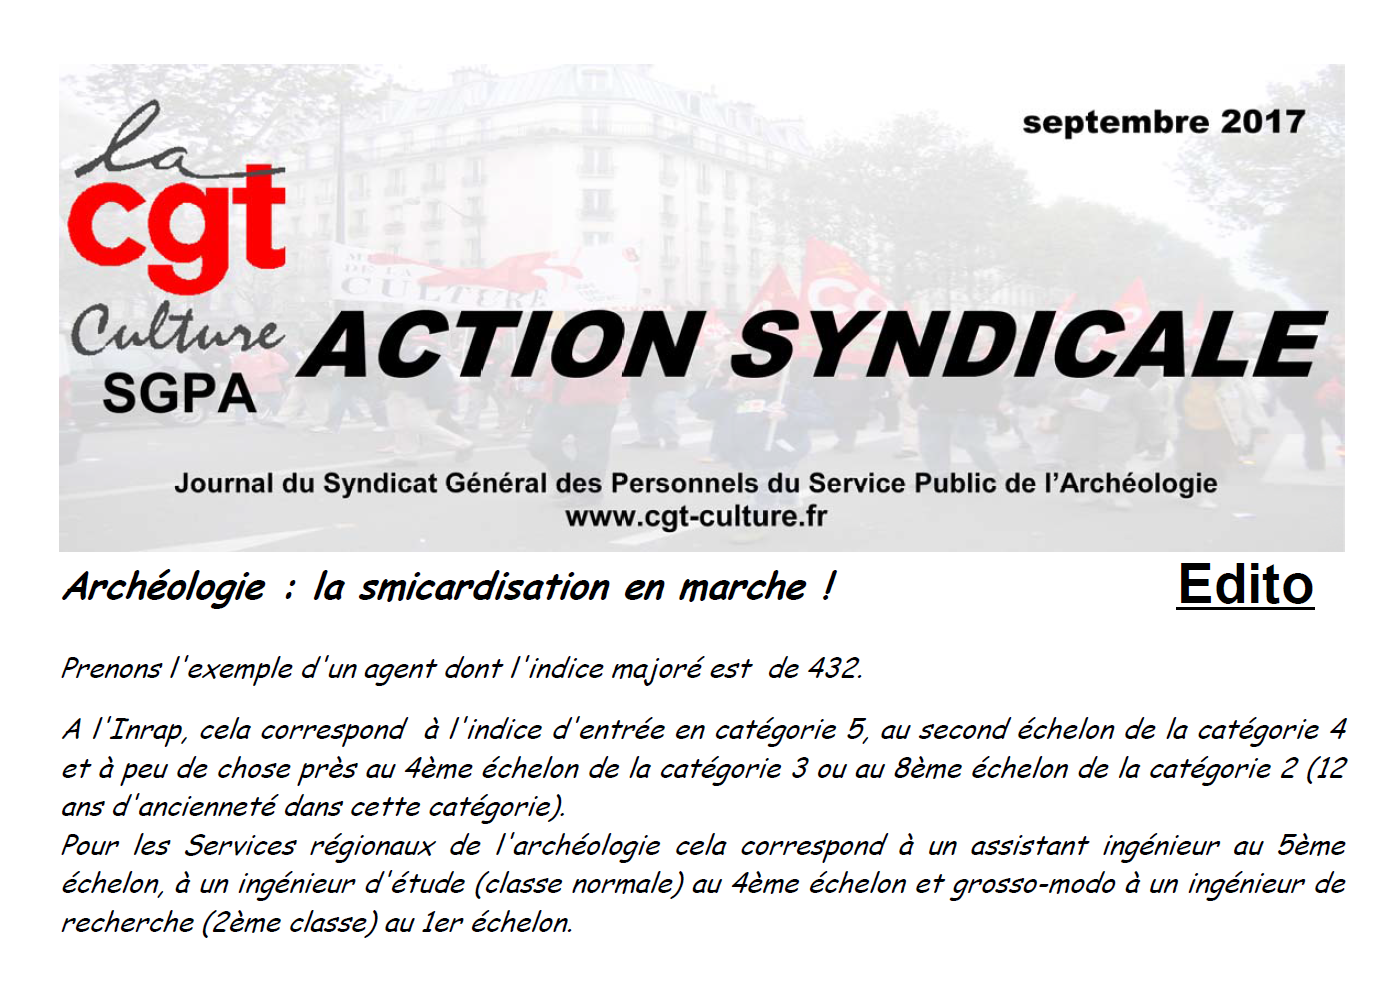 action syndicale septembre 2017